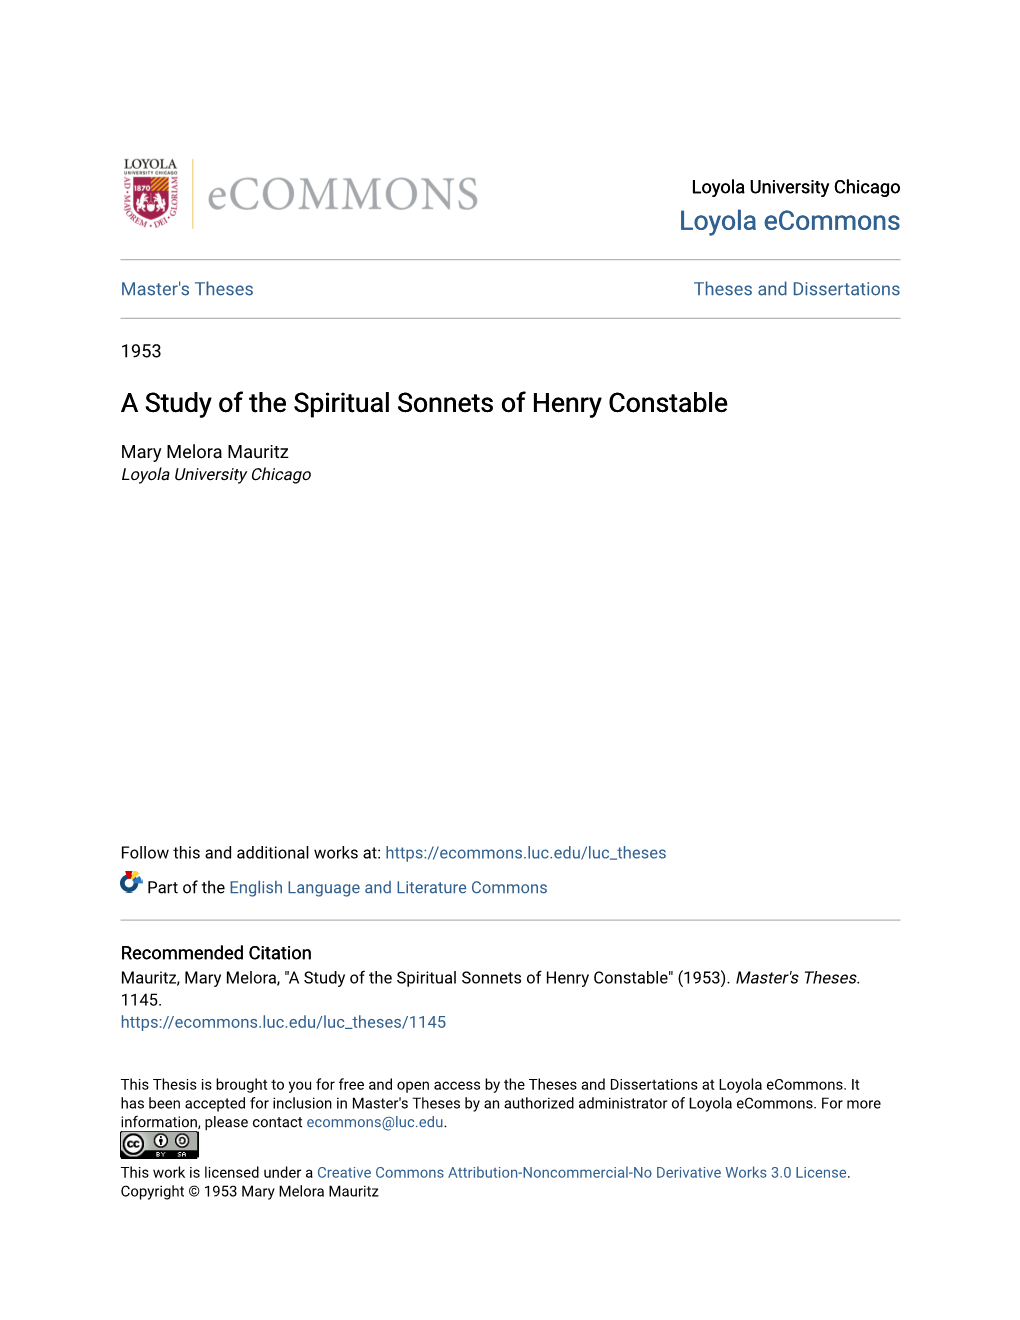 A Study of the Spiritual Sonnets of Henry Constable